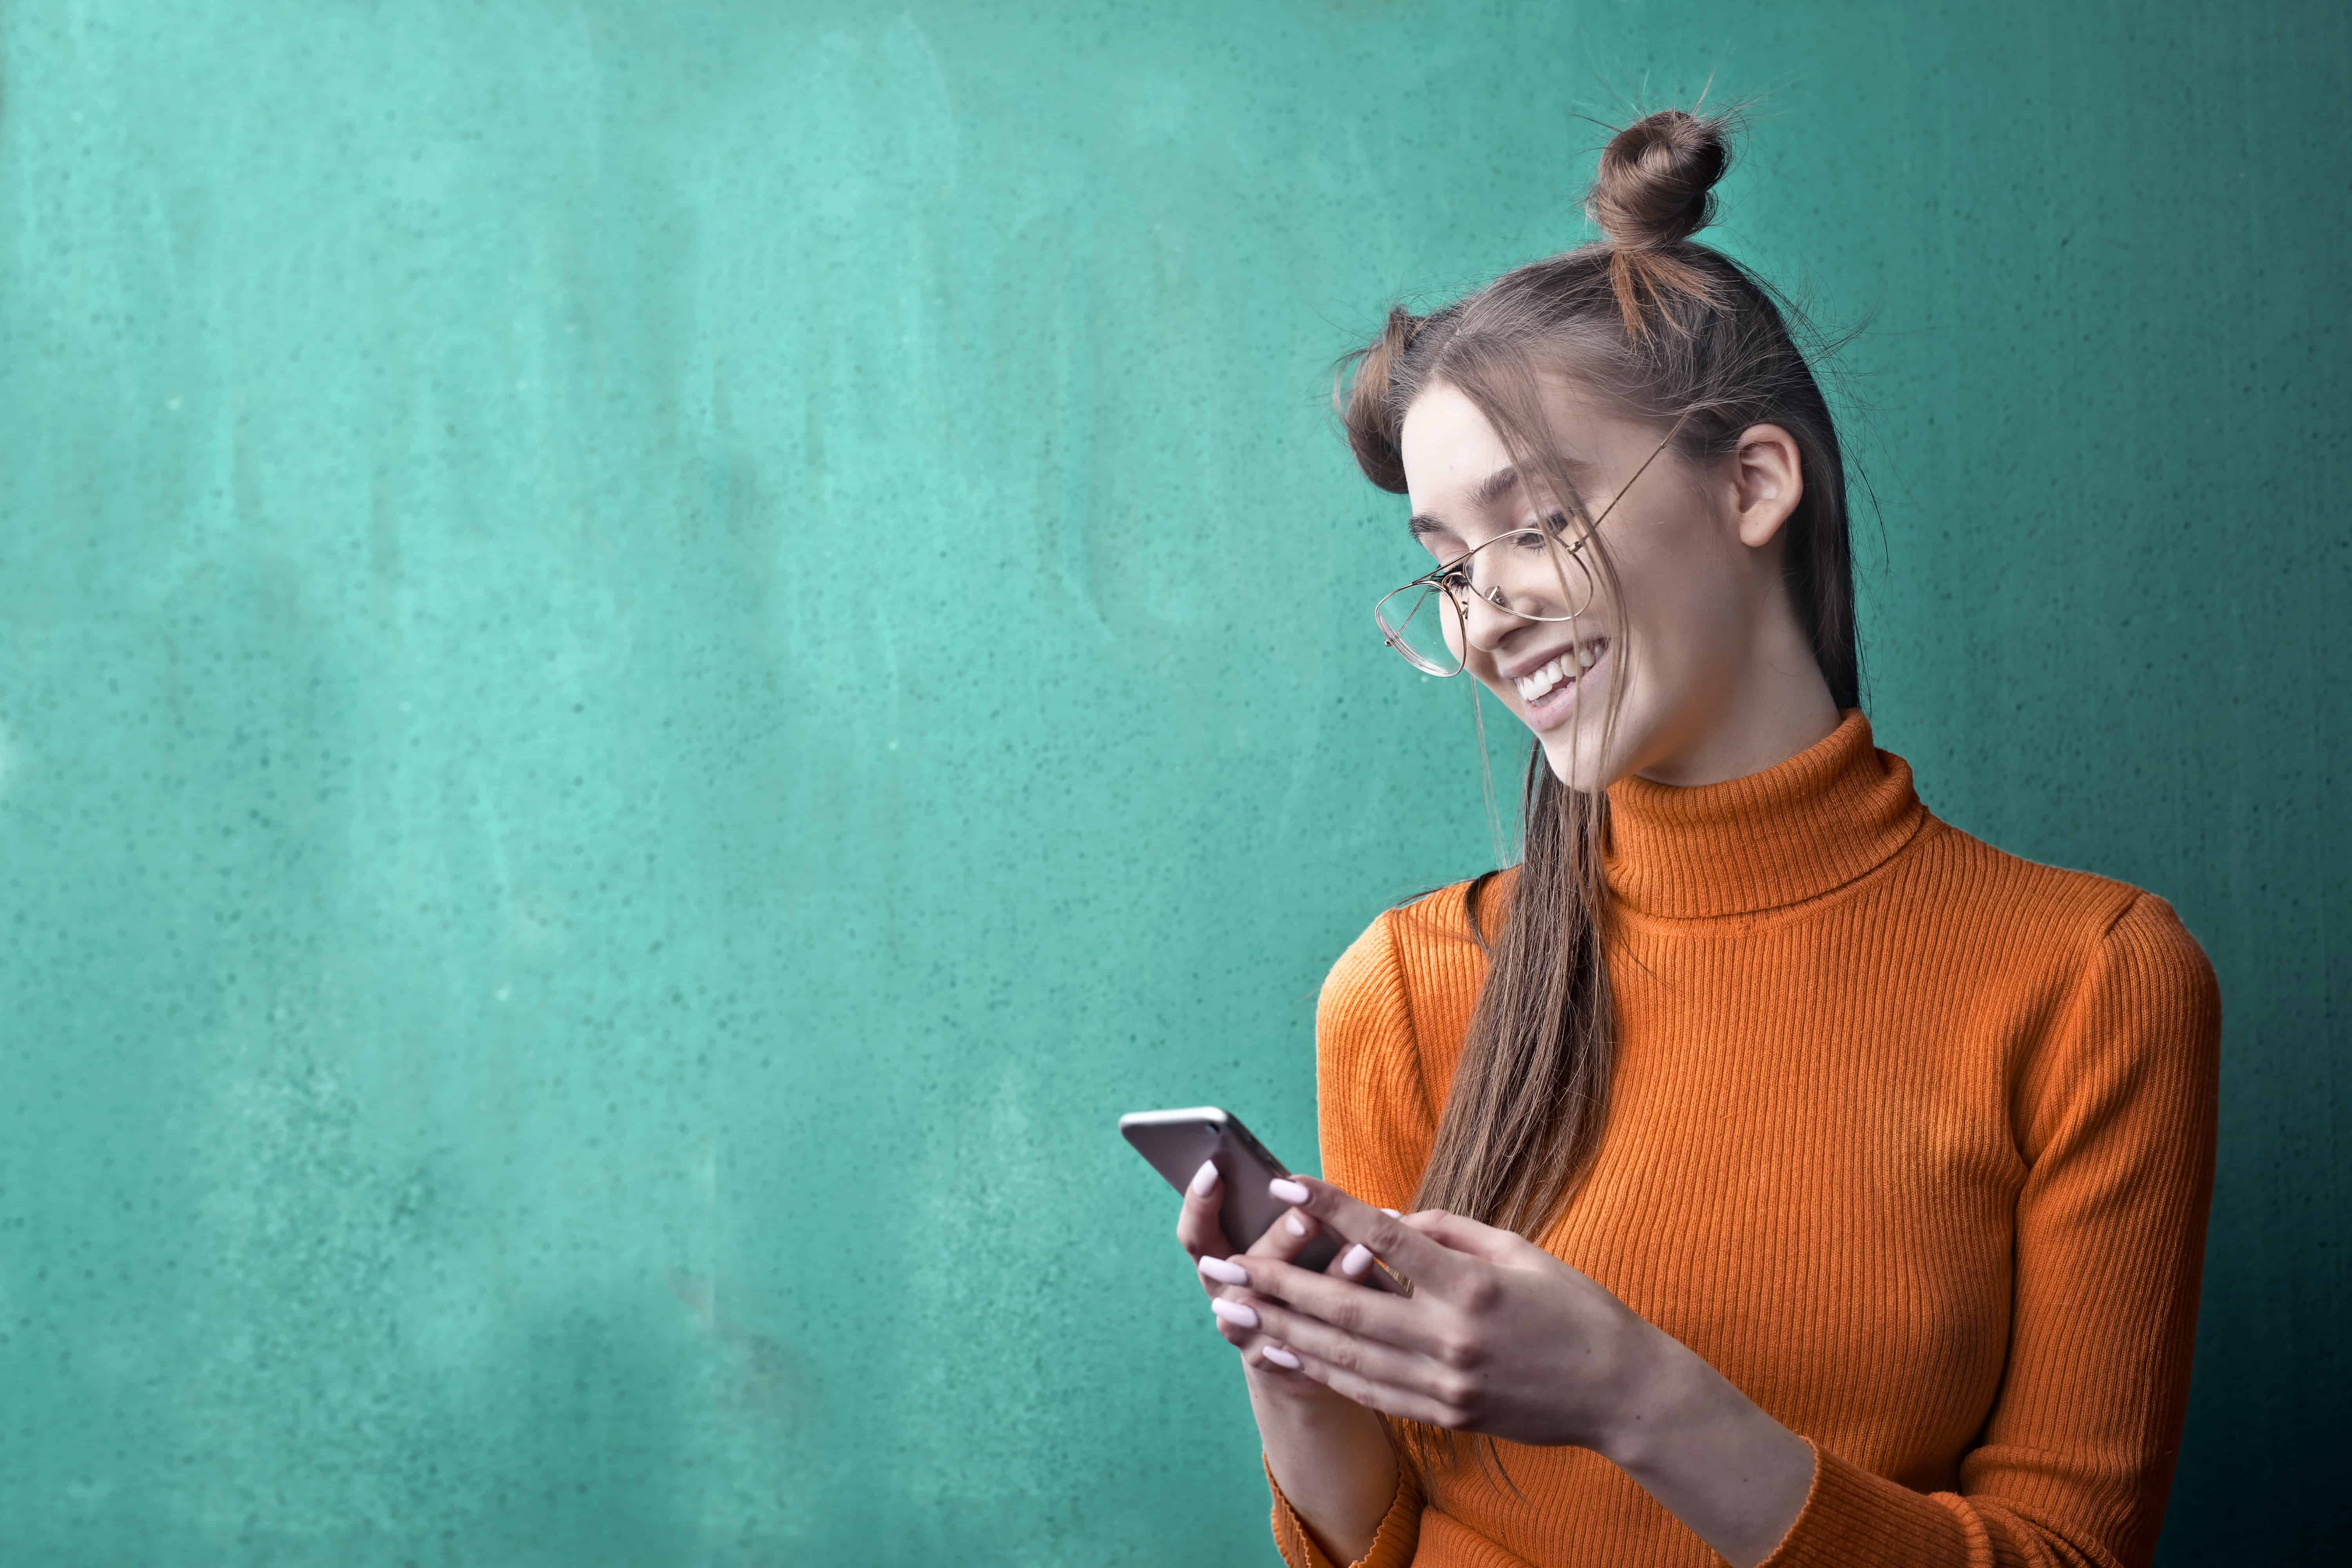 Smiling woman in orange top texting on phone